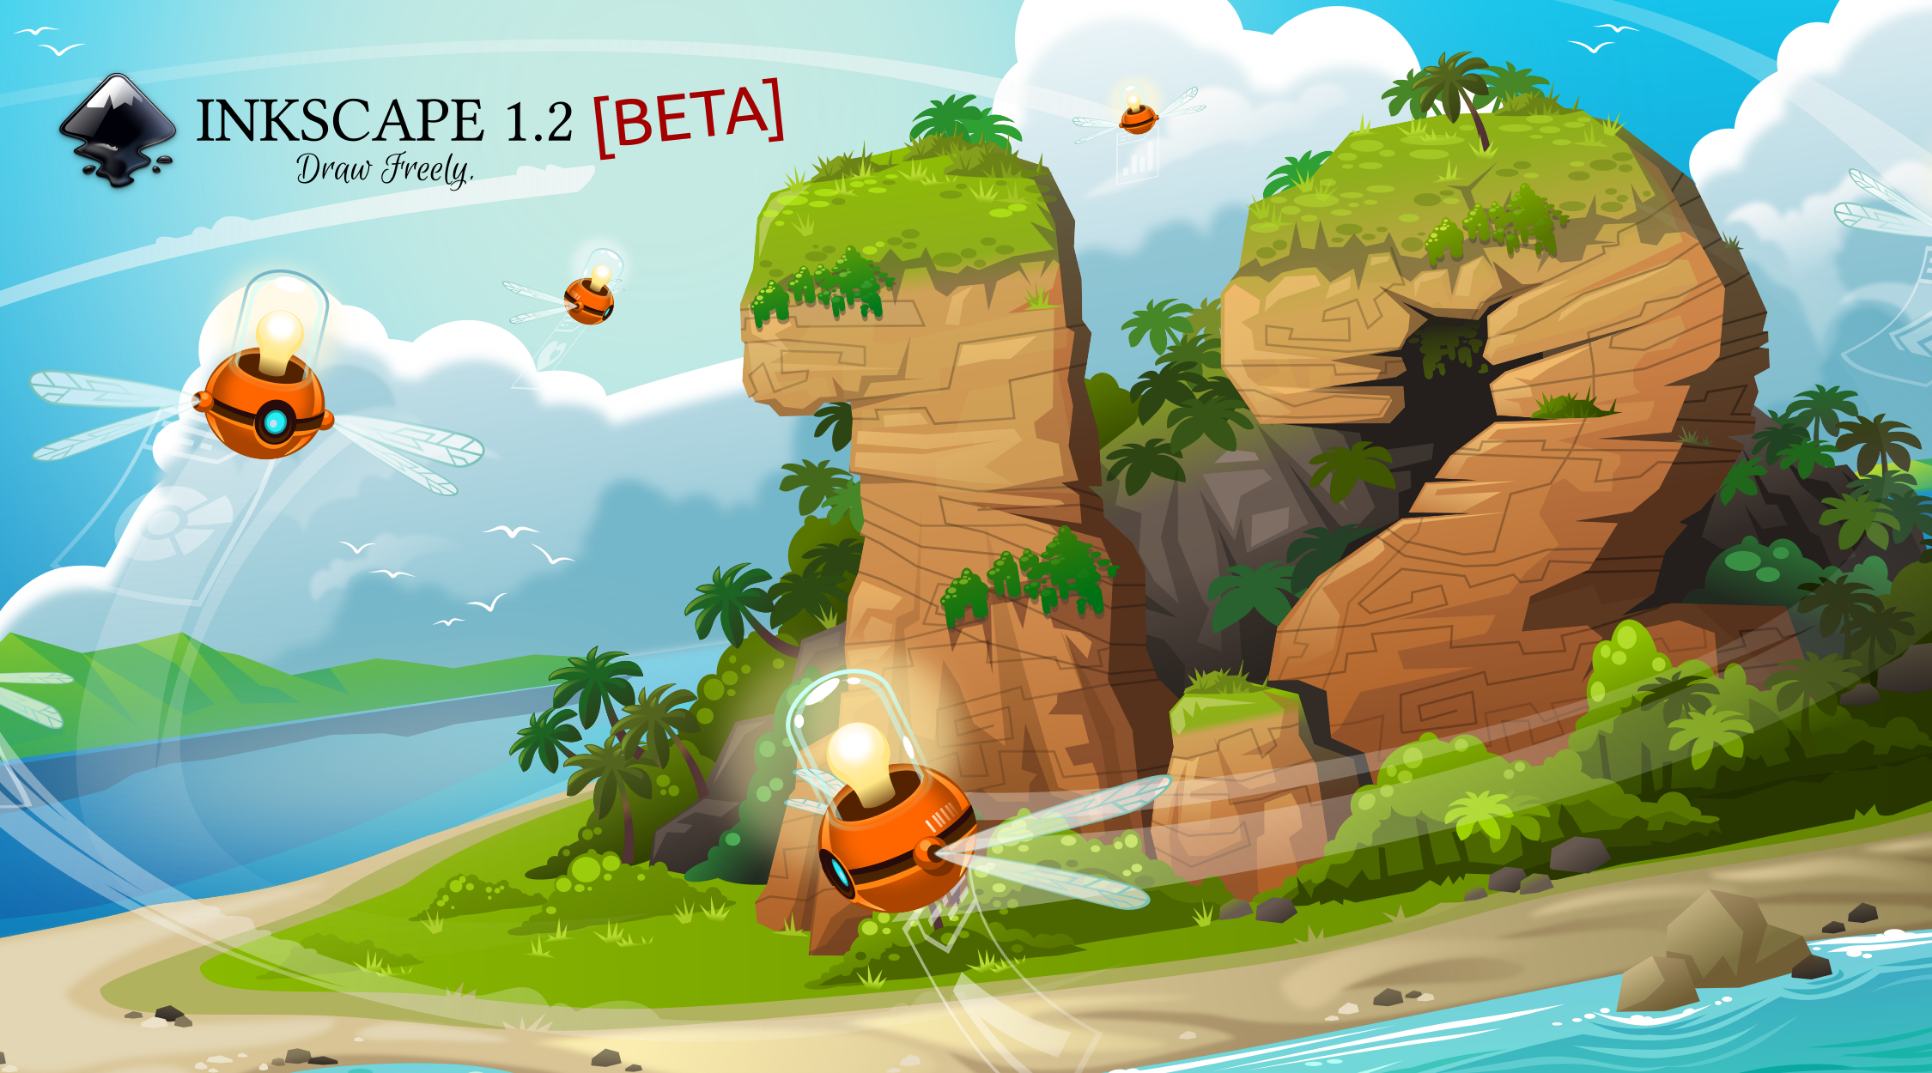 Inkscape 1.2 About Screen with a tropical island with rocks in the shape of a '1.2' and multiple flying drones symbolizing creative ideas. Text: Inkscape 1.2 Beta, Draw Freely.